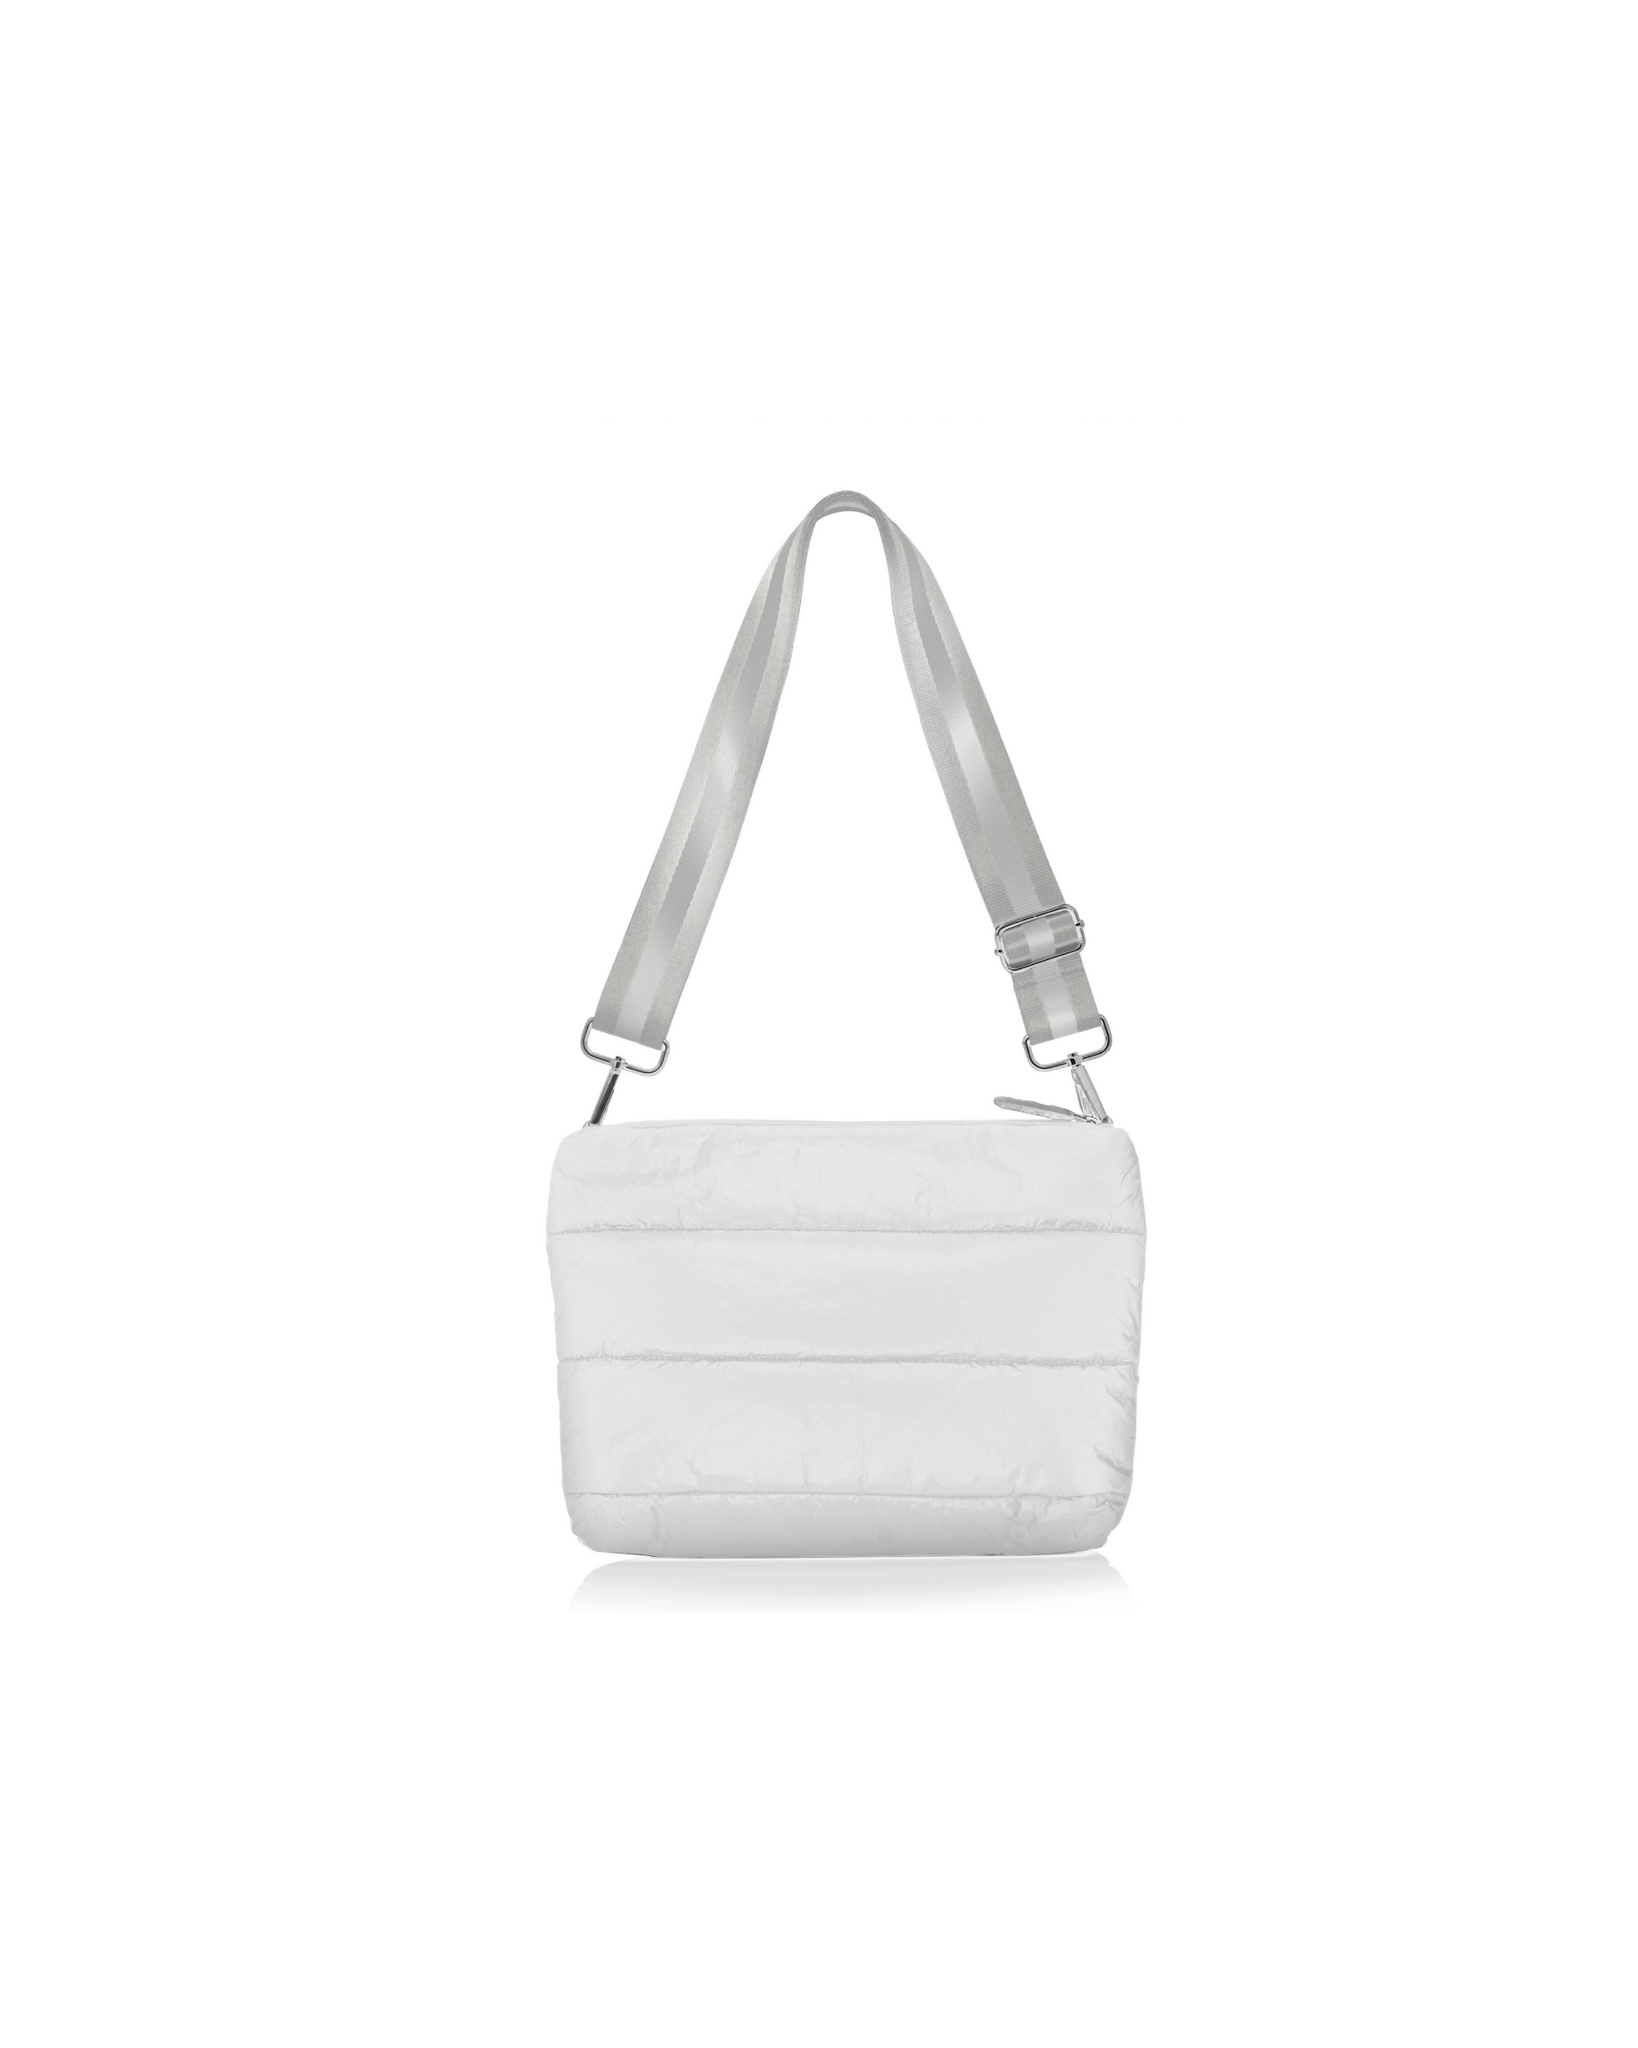 Puffer Crossbody Purse | Shimmer White-Sea Biscuit Del Mar